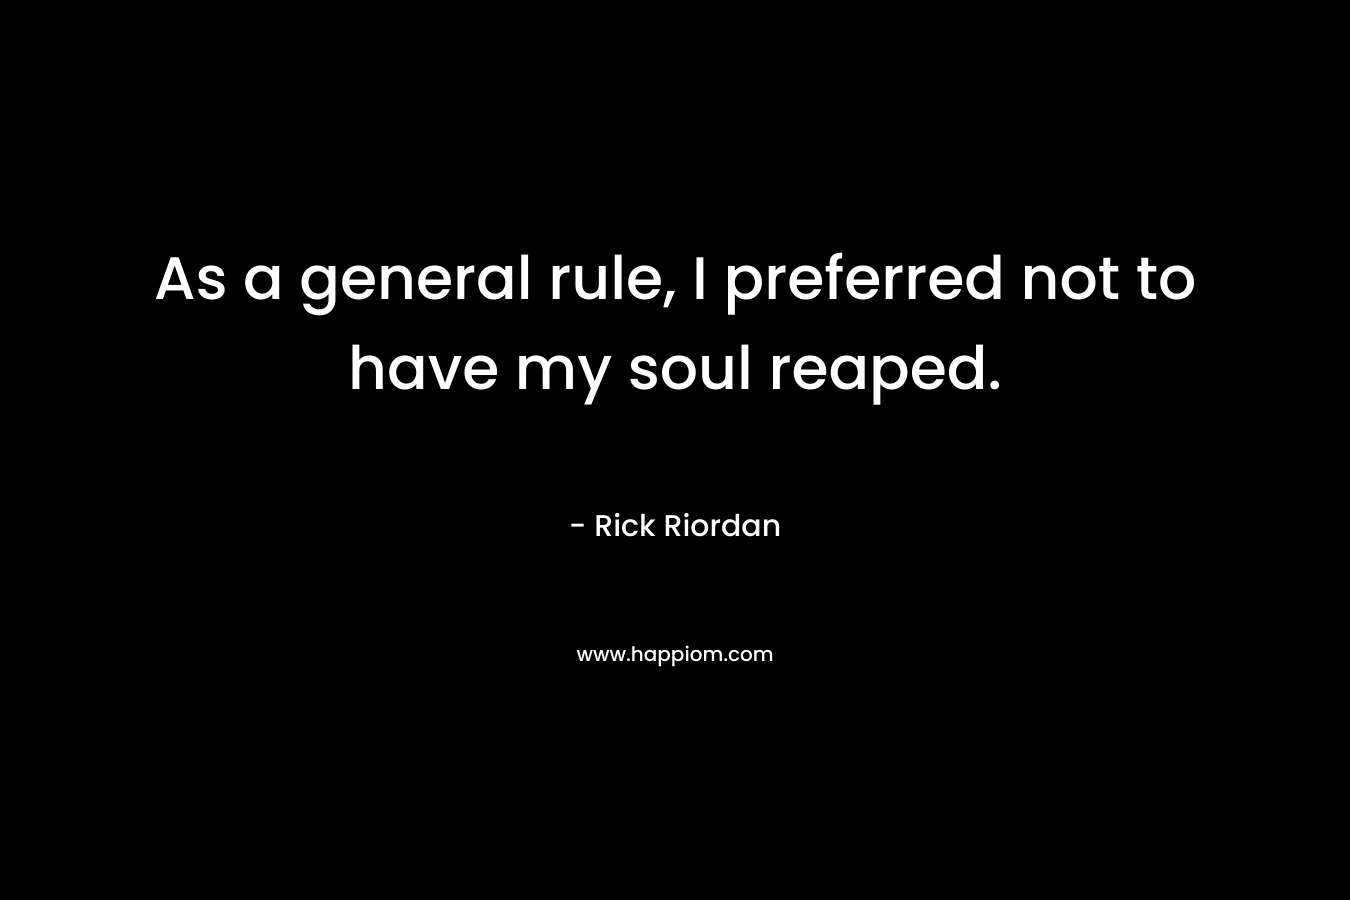 As a general rule, I preferred not to have my soul reaped. – Rick Riordan